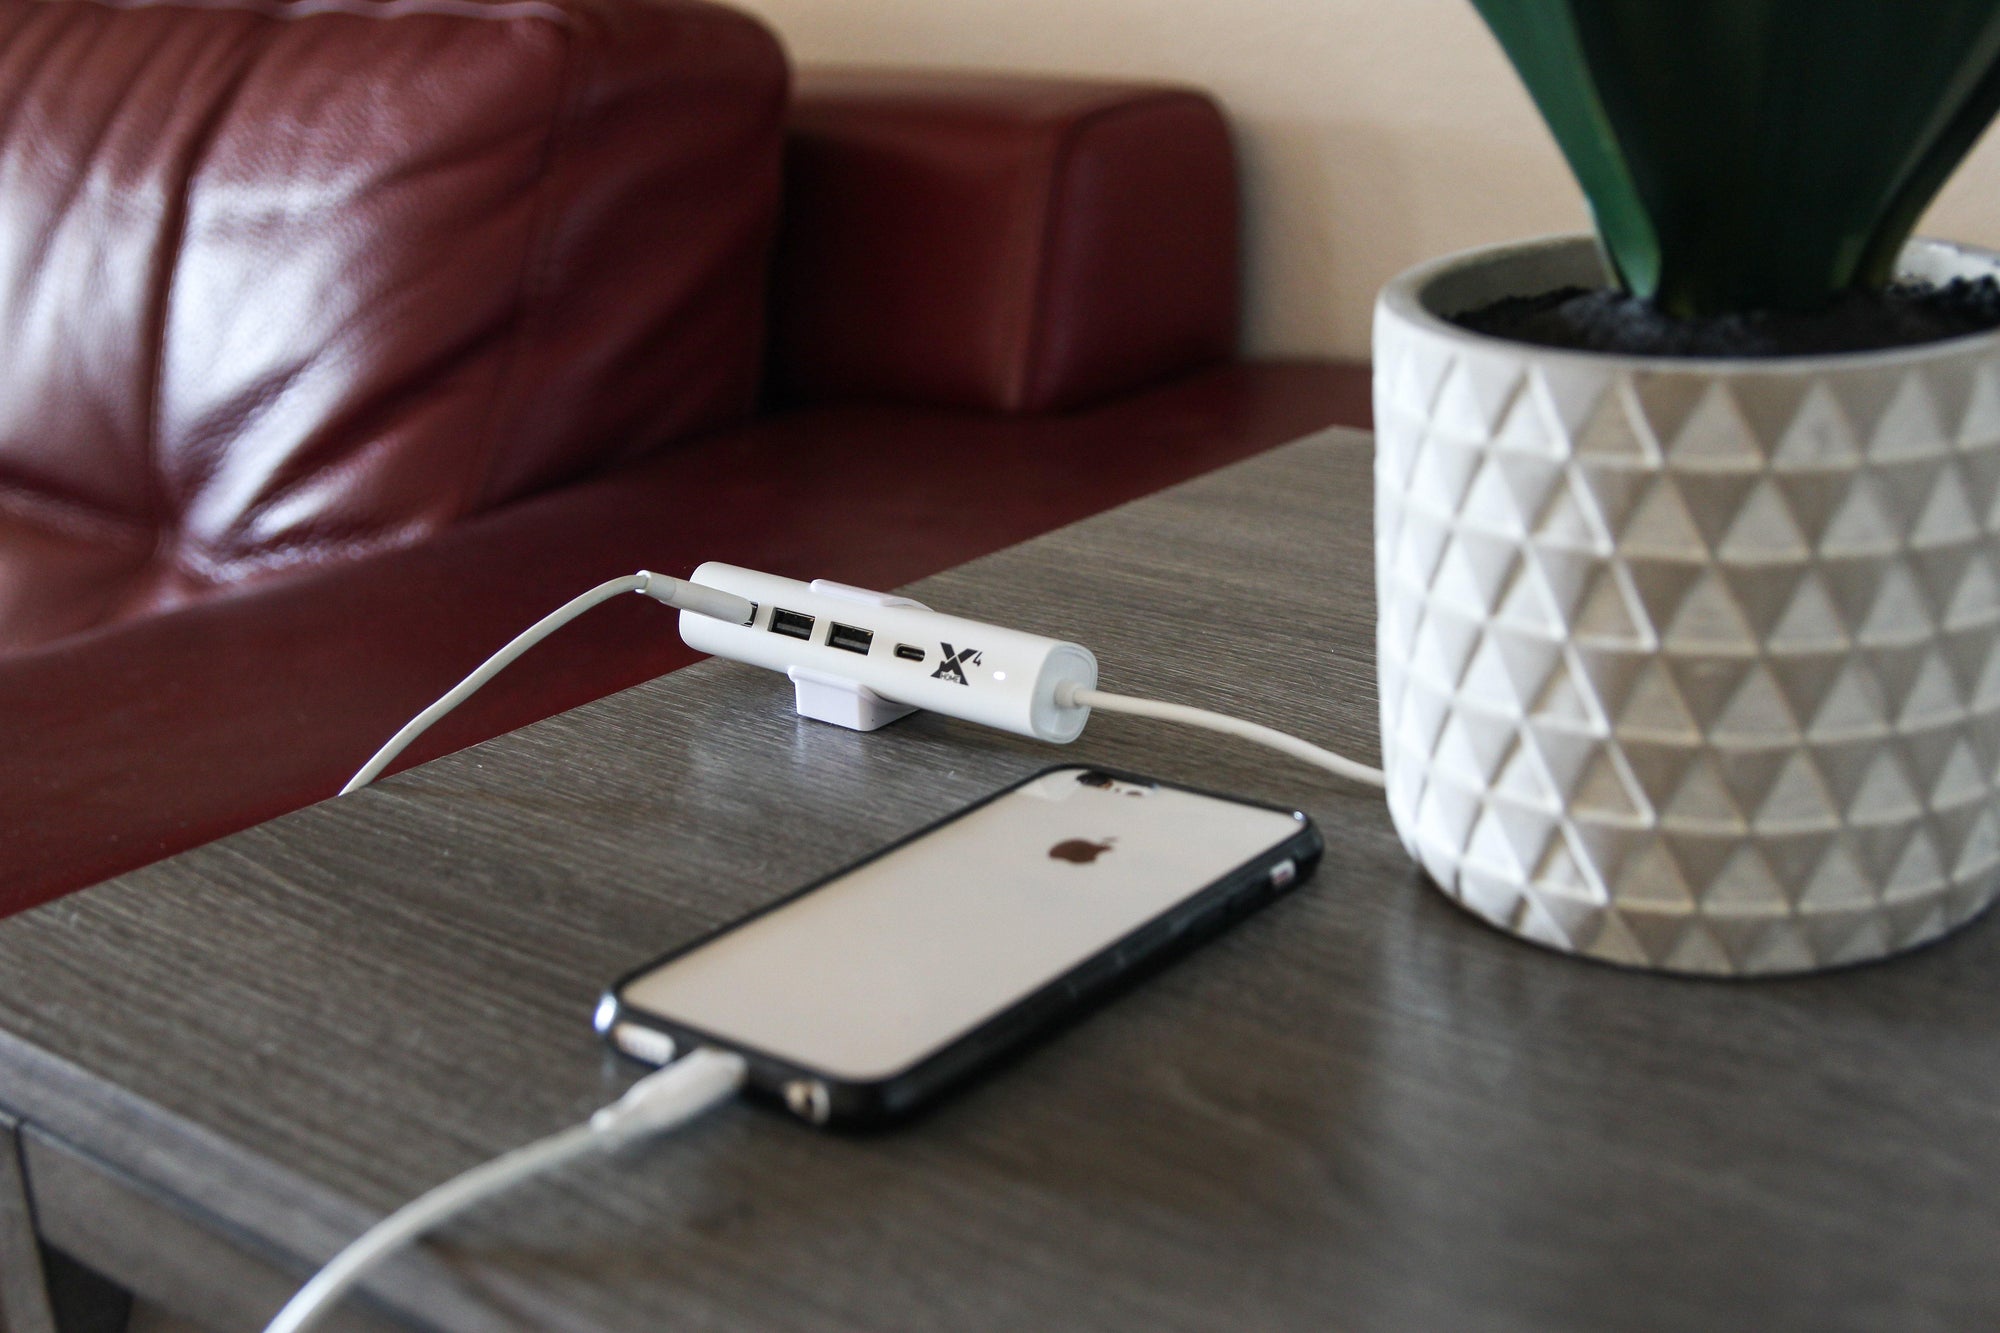 X4 Home Super Compact 4-Port Charger with Type-C PD fast charging for the Home or Office - White - RapidX